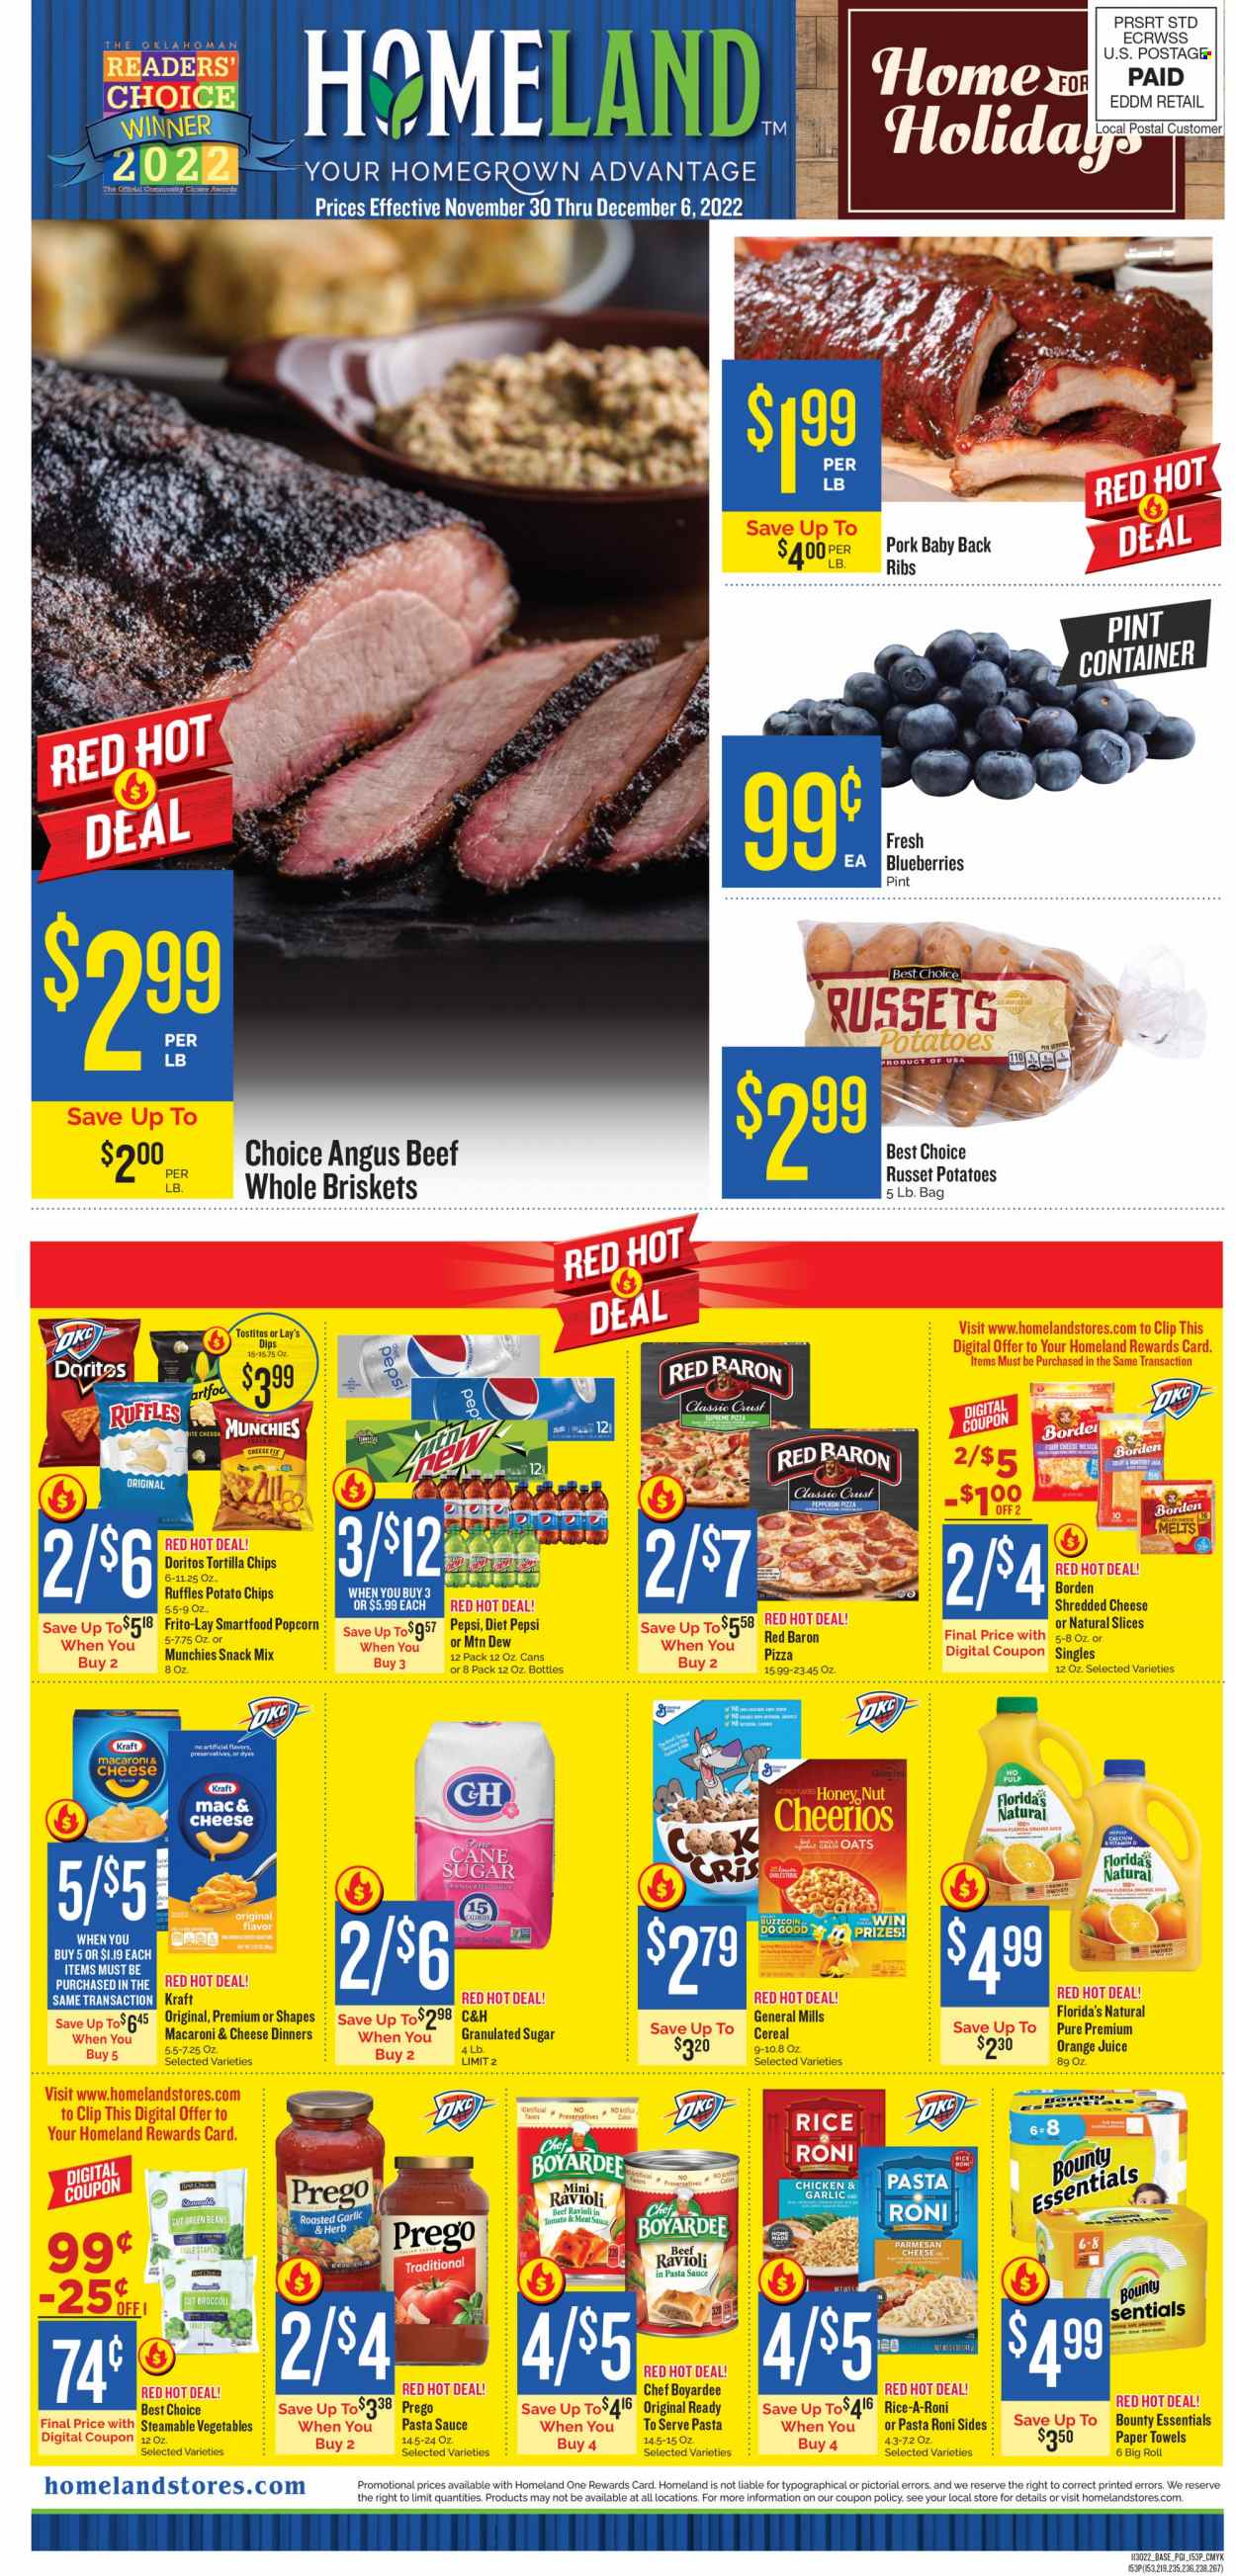 thumbnail - Homeland Flyer - 11/30/2022 - 12/06/2022 - Sales products - beans, broccoli, green beans, russet potatoes, blueberries, ravioli, pasta sauce, Kraft®, pepperoni, Colby cheese, Monterey Jack cheese, shredded cheese, parmesan, milk, Red Baron, cookies, snack, Bounty, Florida's Natural, Doritos, tortilla chips, potato chips, chips, Lay’s, Smartfood, popcorn, Frito-Lay, Ruffles, Tostitos, cane sugar, granulated sugar, sugar, oats, Chef Boyardee, cereals, rice, Mountain Dew, Pepsi, orange juice, juice, Diet Pepsi, beef meat, pork meat, pork ribs, pork back ribs, kitchen towels, paper towels, calcium. Page 1.